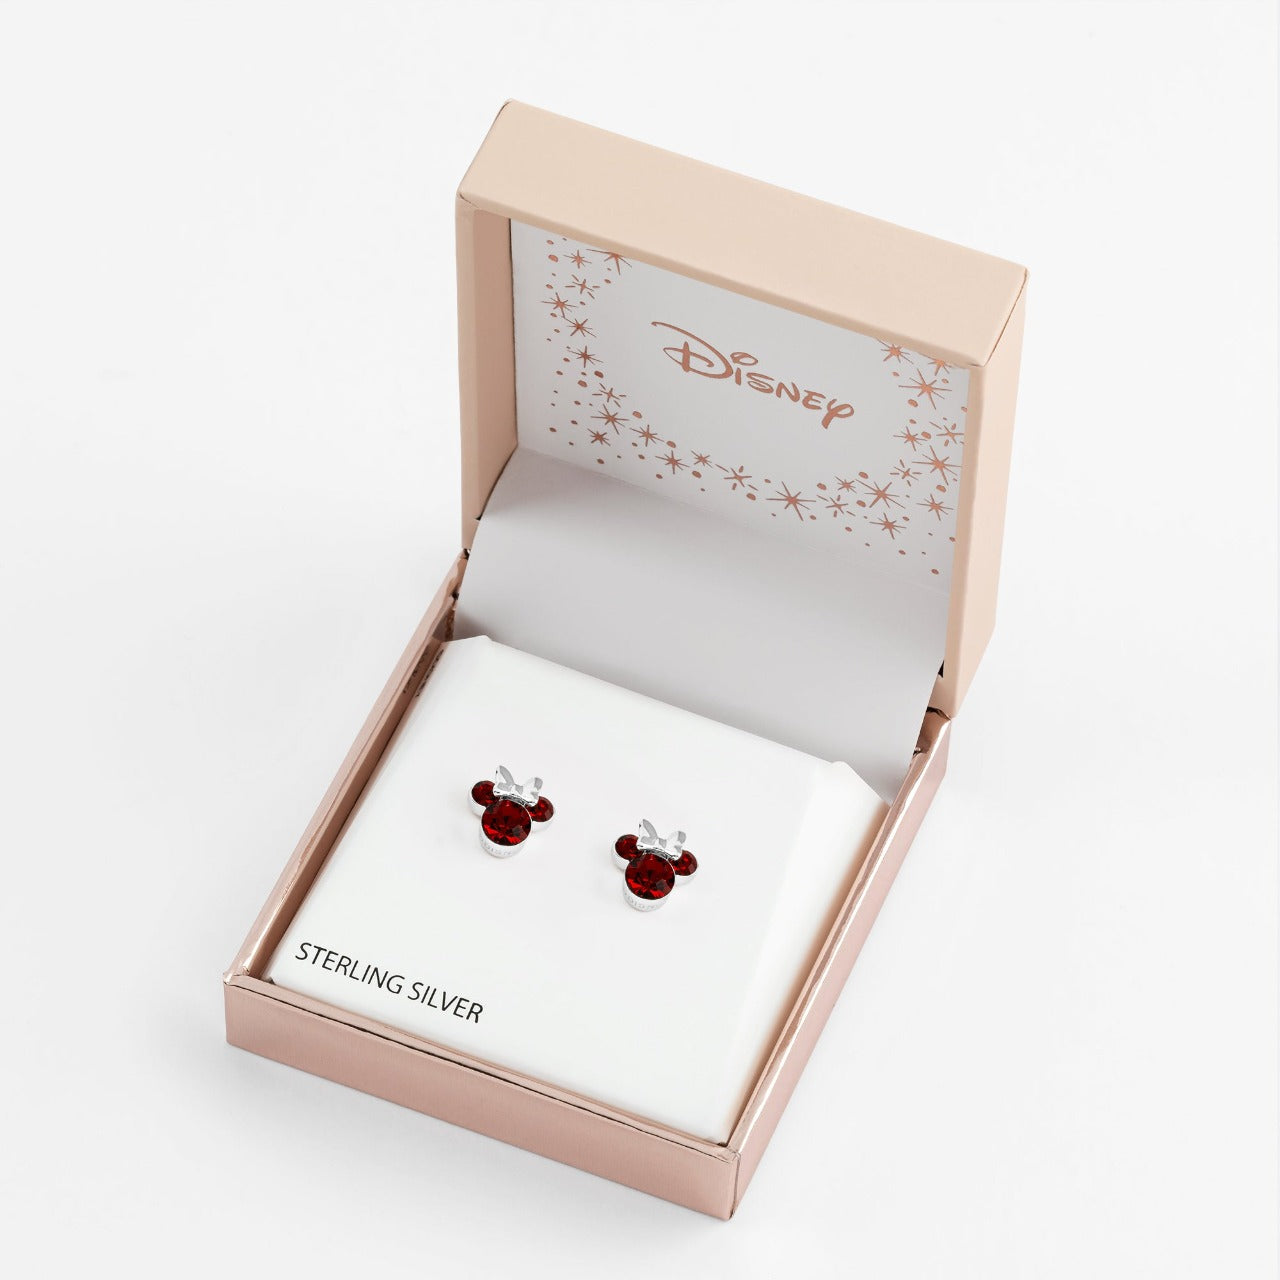 Disney Minnie Mouse Sterling Silver Birthstone Earrings Siam Red  Siam Red January Birthstone  Stunning silver Birthstone earrings form a silhouette of Minnie Mouse with red CZ Crystals adding a feminine touch to the Disney classic piece of Jewellery.  Trendy and fashionable design, the Disney Minnie Mouse silhouette sterling silver earrings add a chic, fun touch to any outfit.